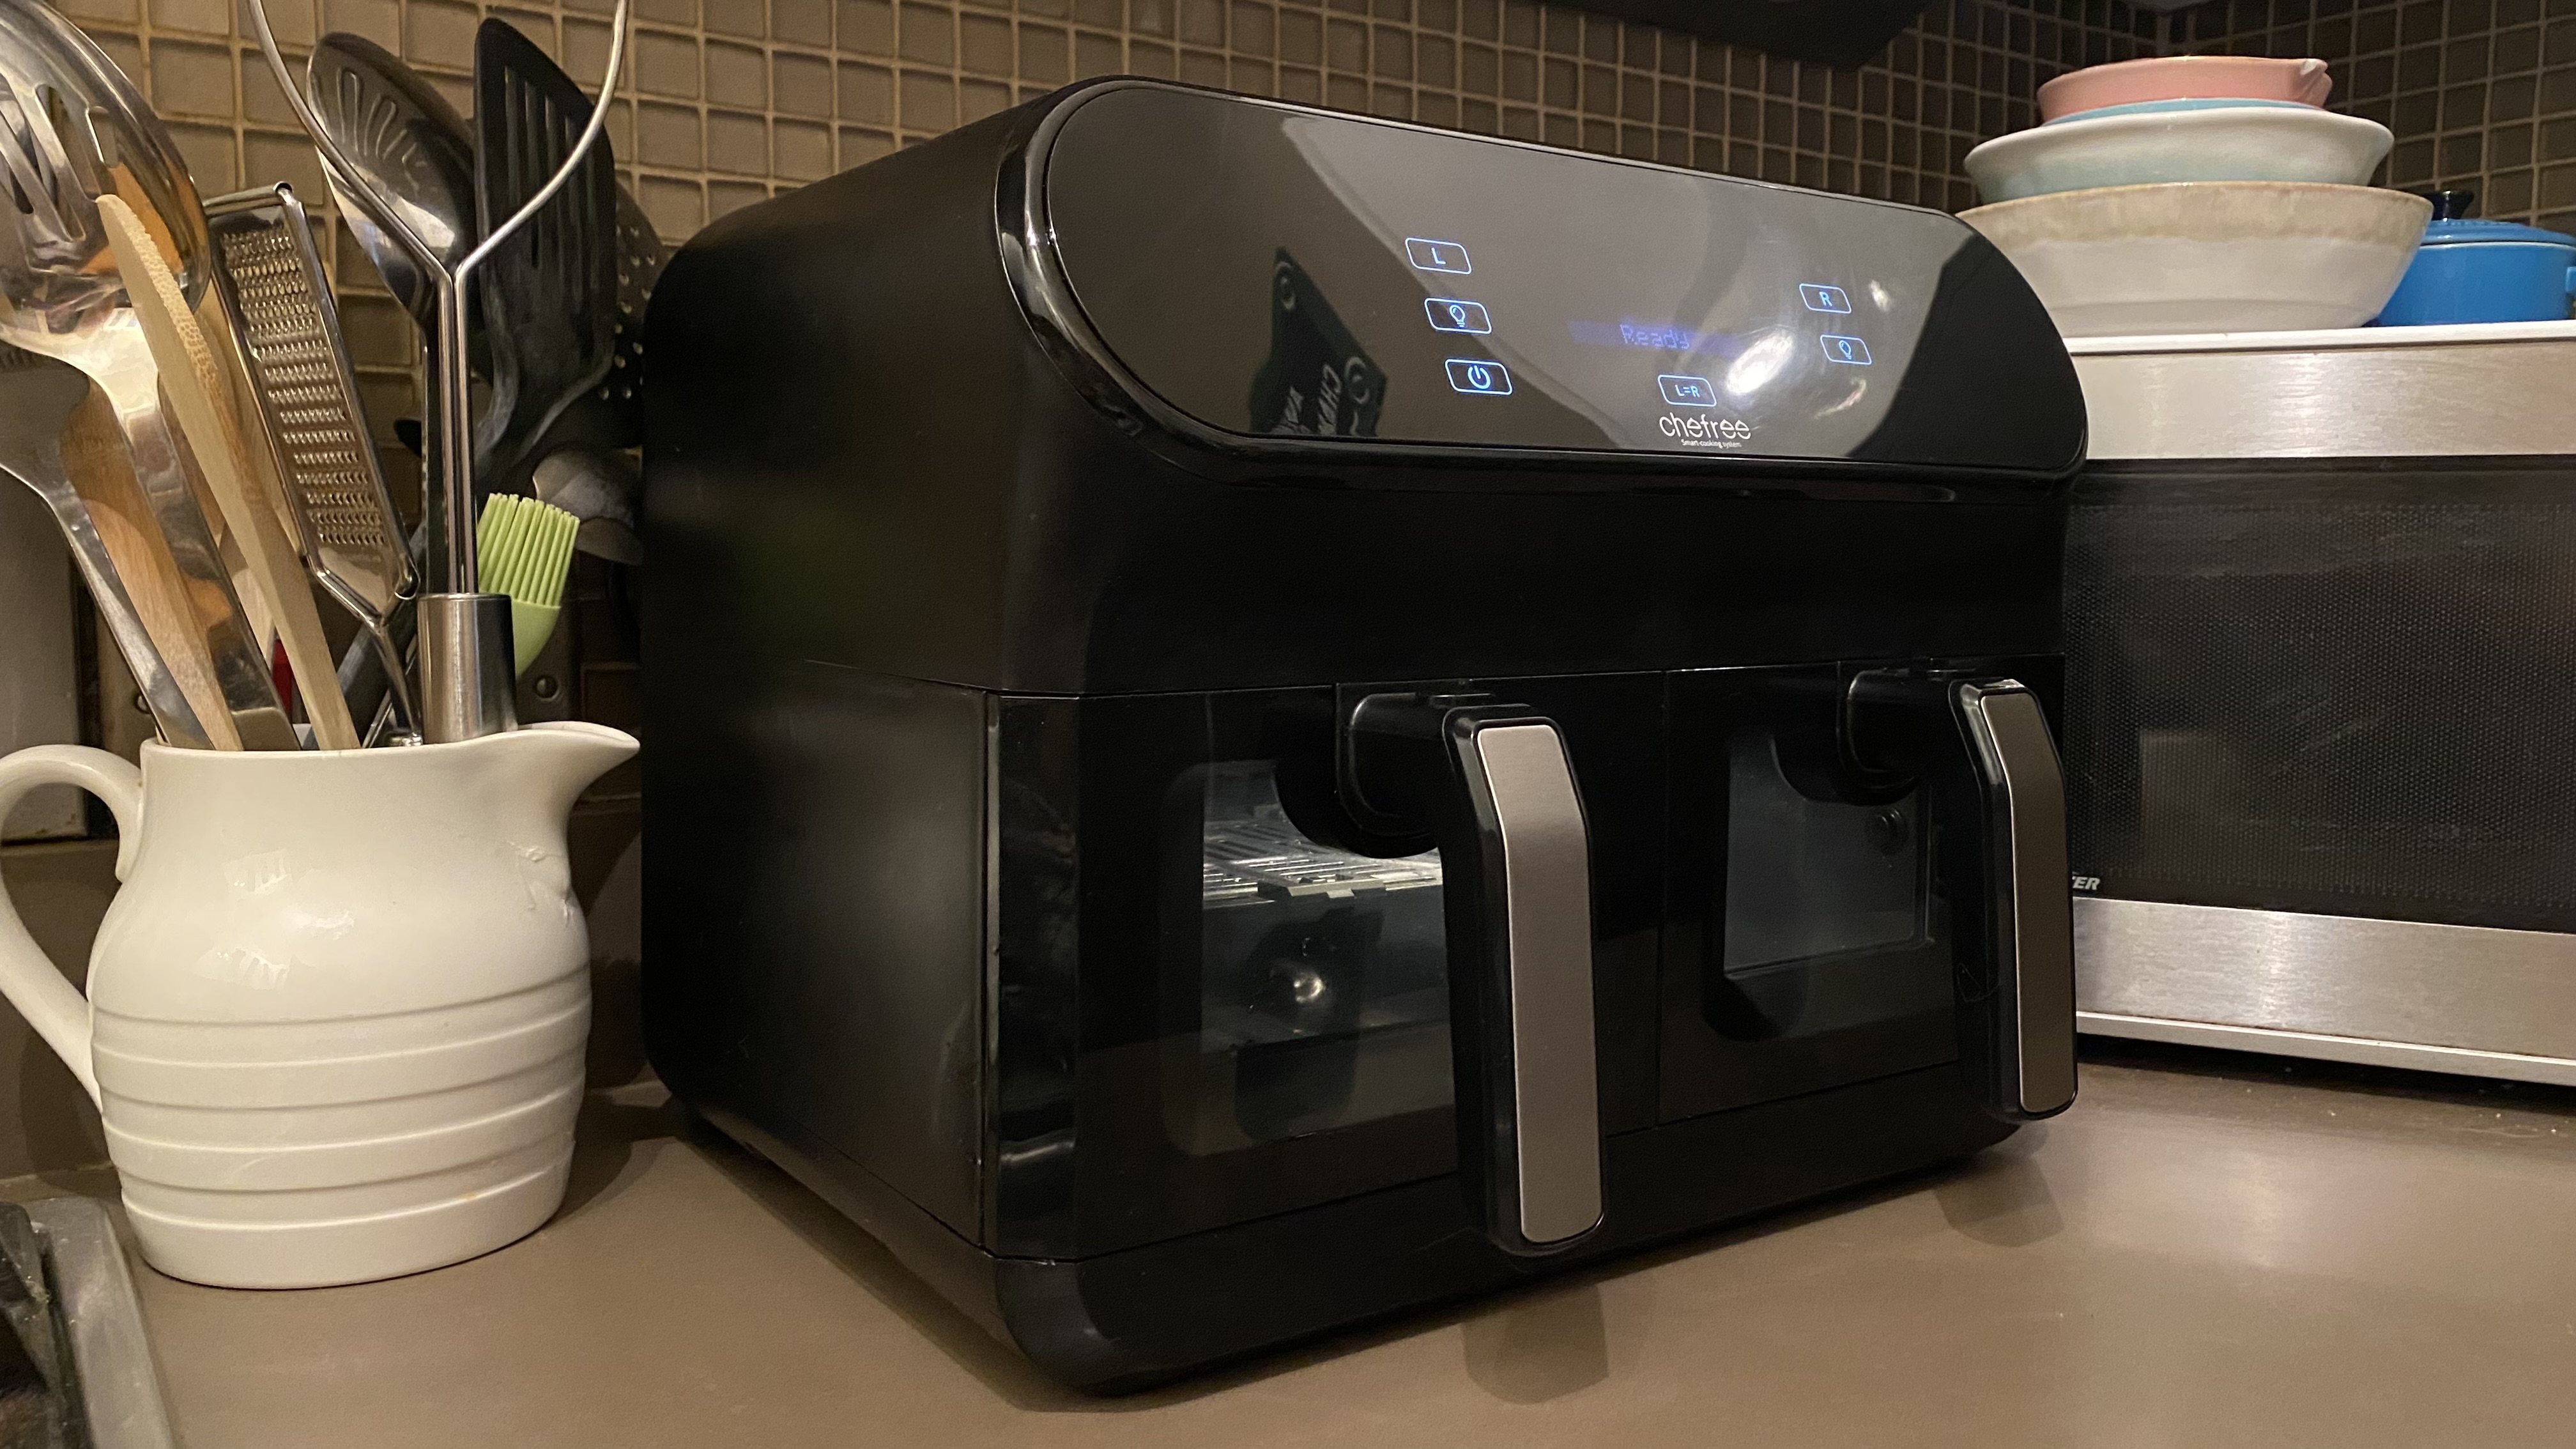  Chefree AFW20 Air Fryer - Best budget dual-drawer